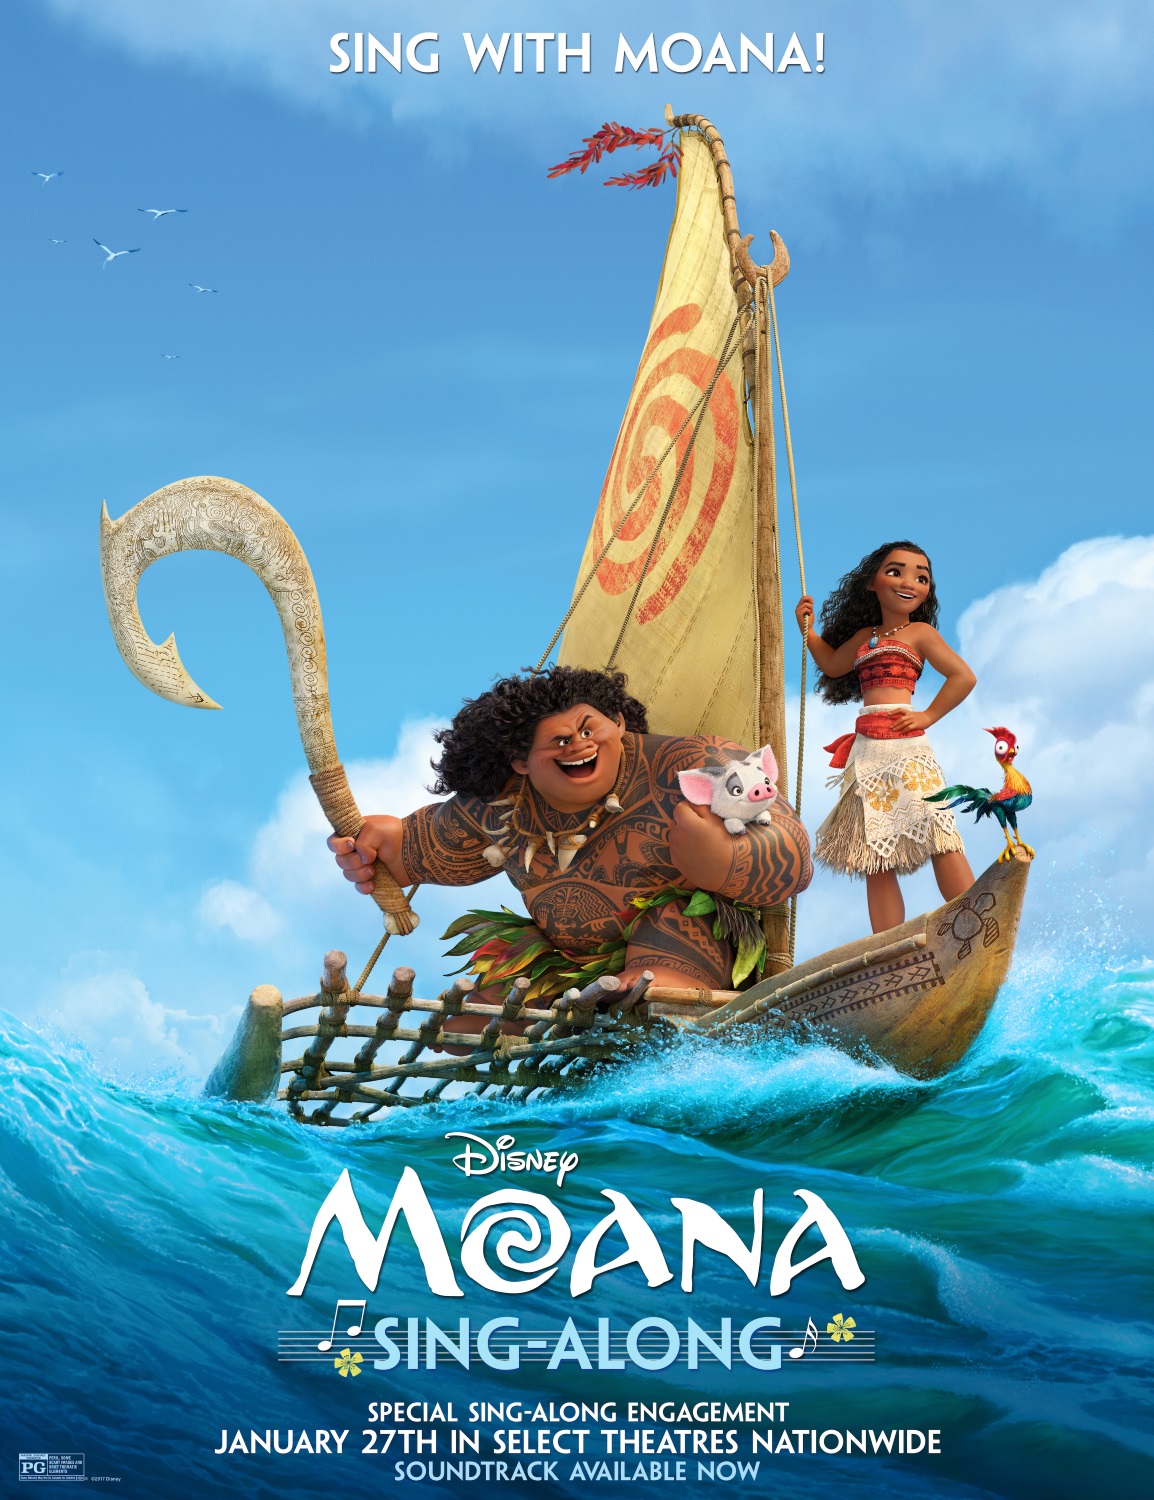 Moana sing-along version to hit theaters in late January